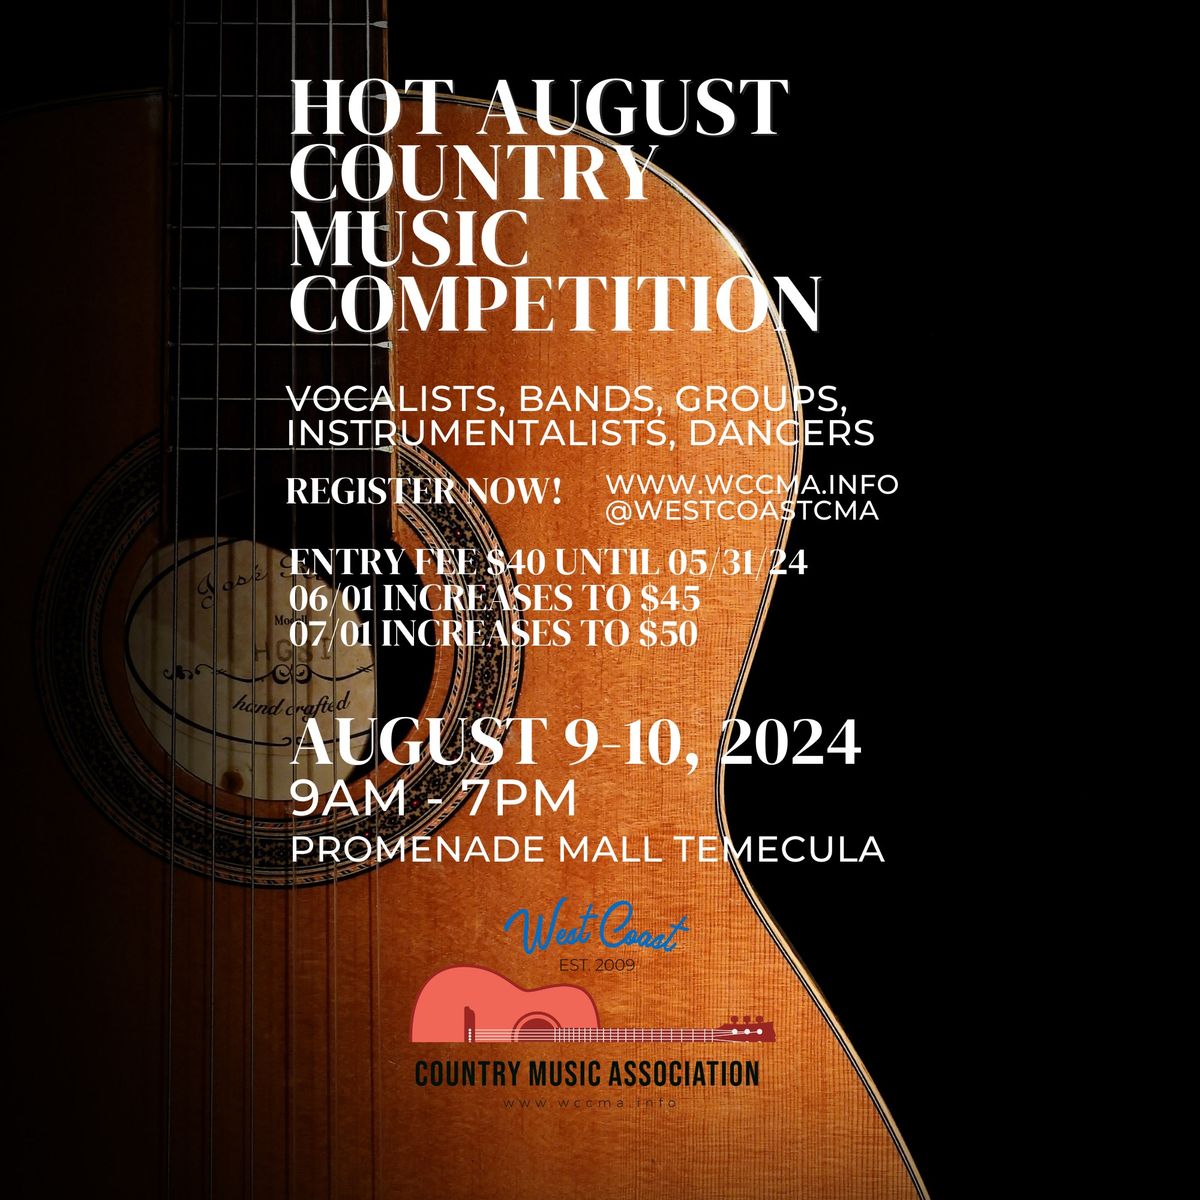 Hot August Country Music Competition 2024